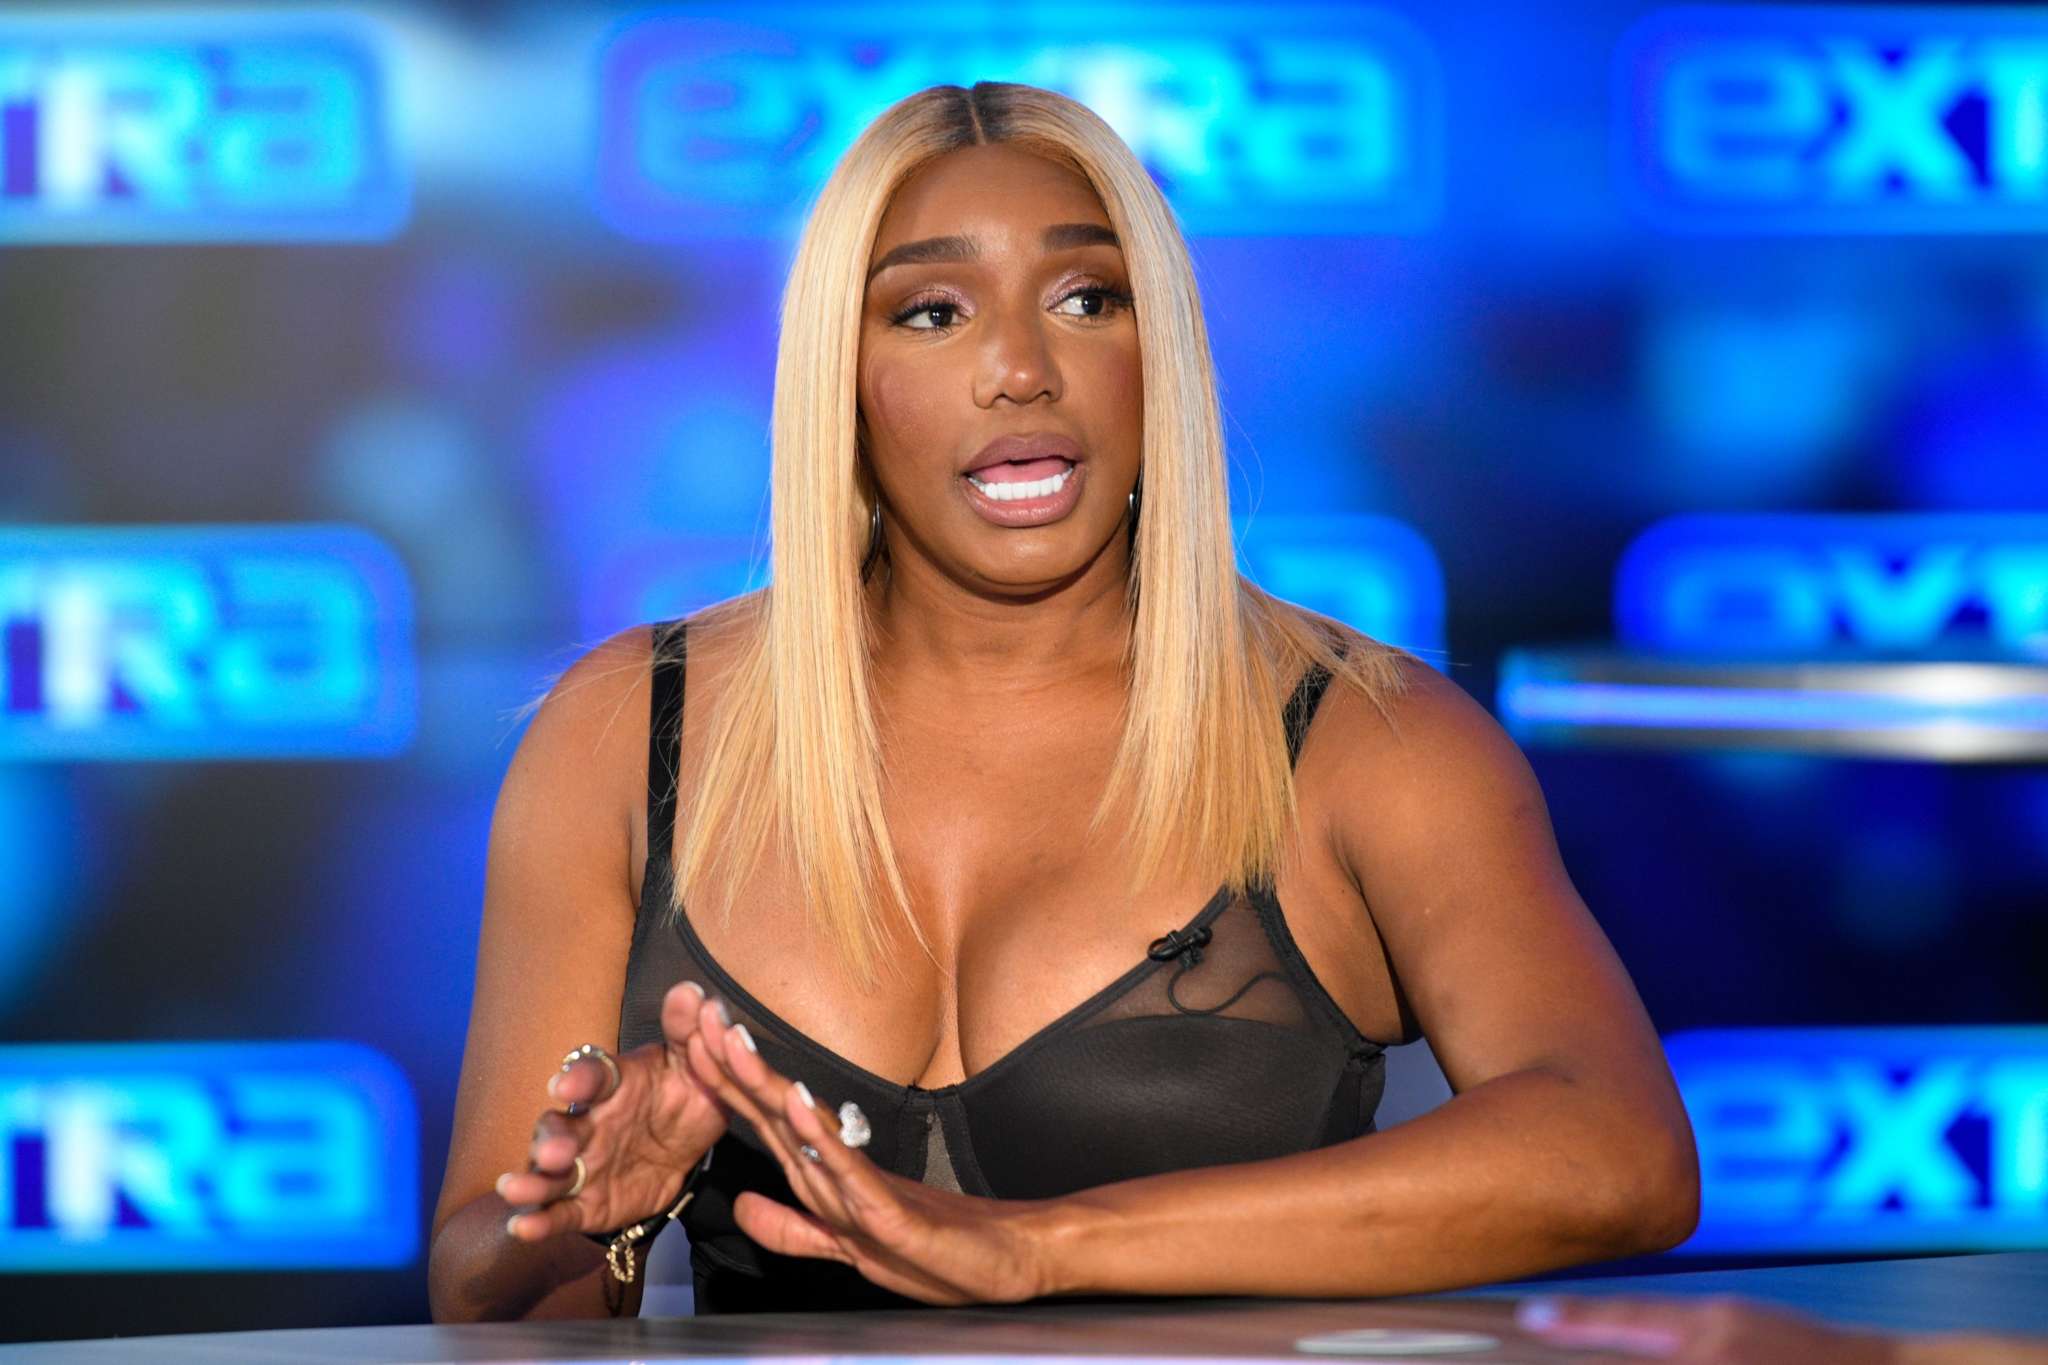 NeNe Leakes Invited Her Long Time BFFs For 'Cocktails & Conversation' - Watch The Juicy Video